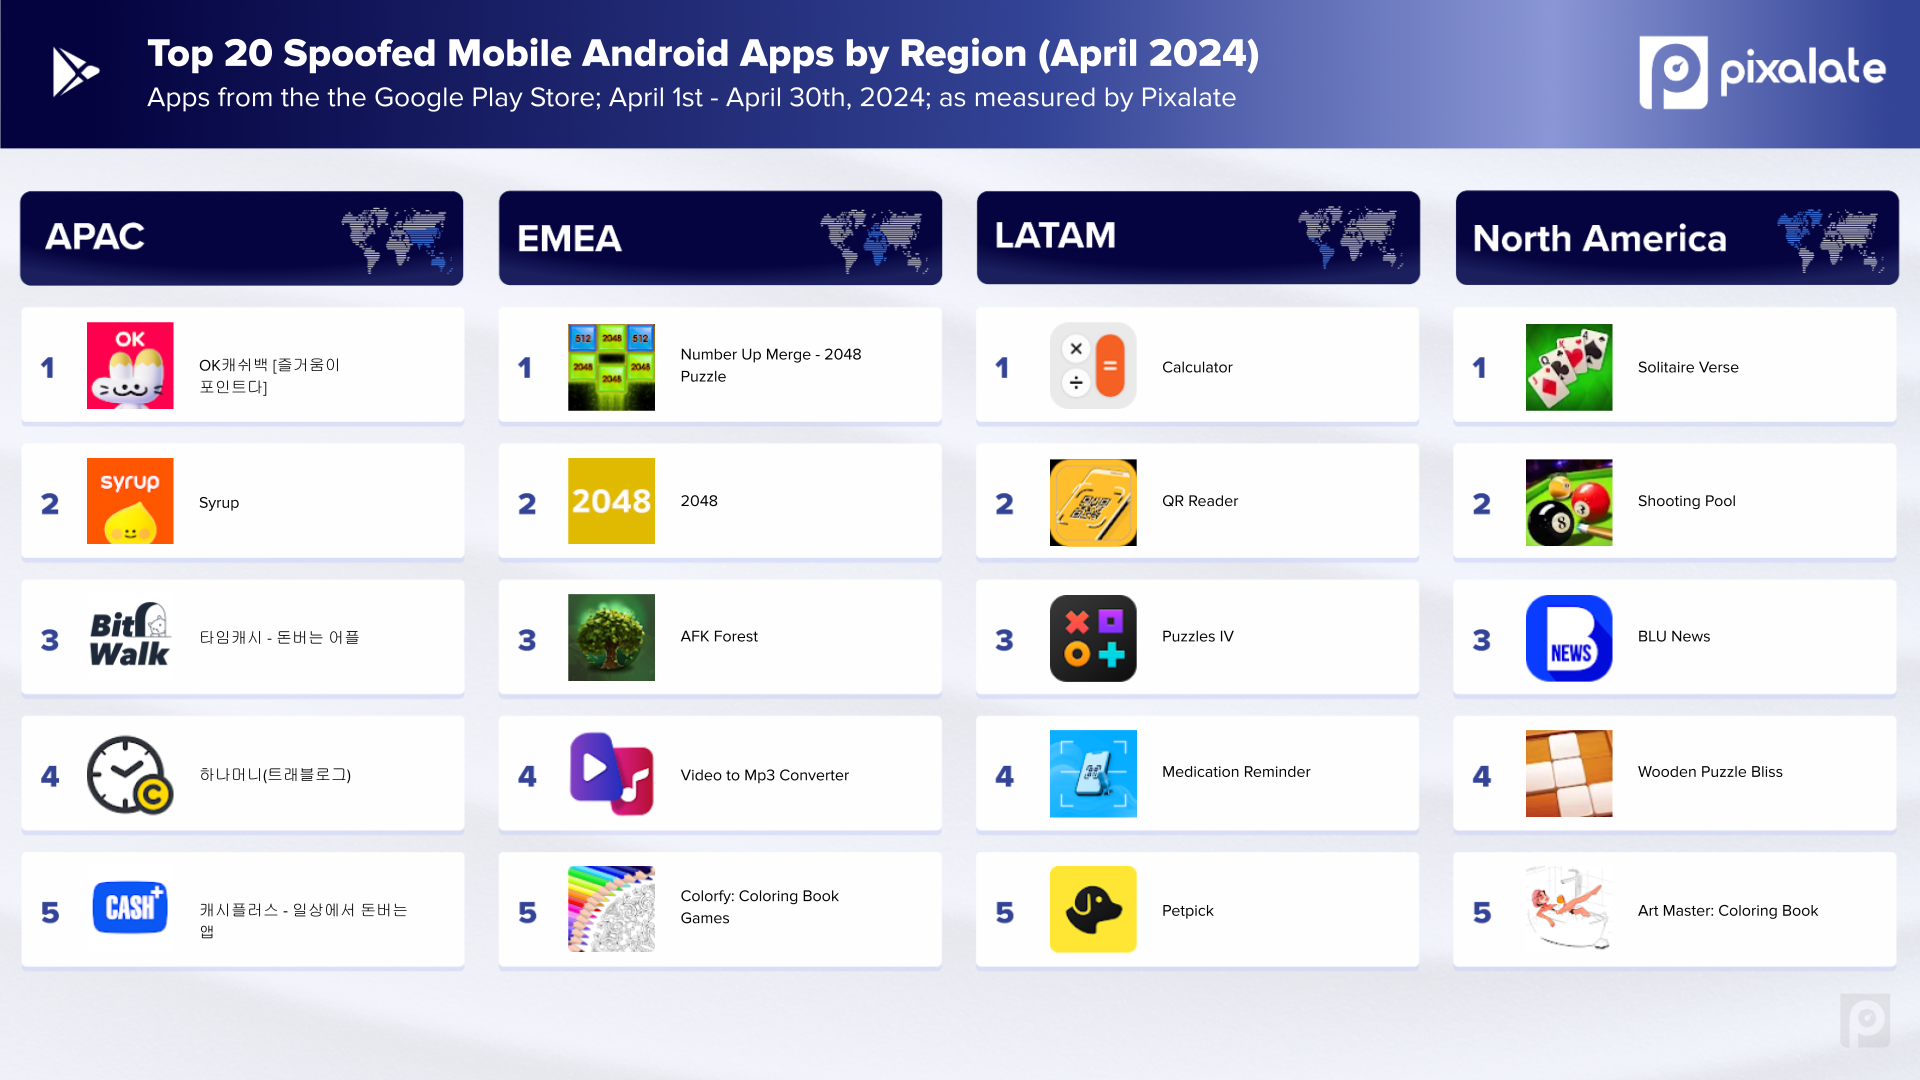 Top Google Play Store mobile apps at risk of spoofing in April 2024 